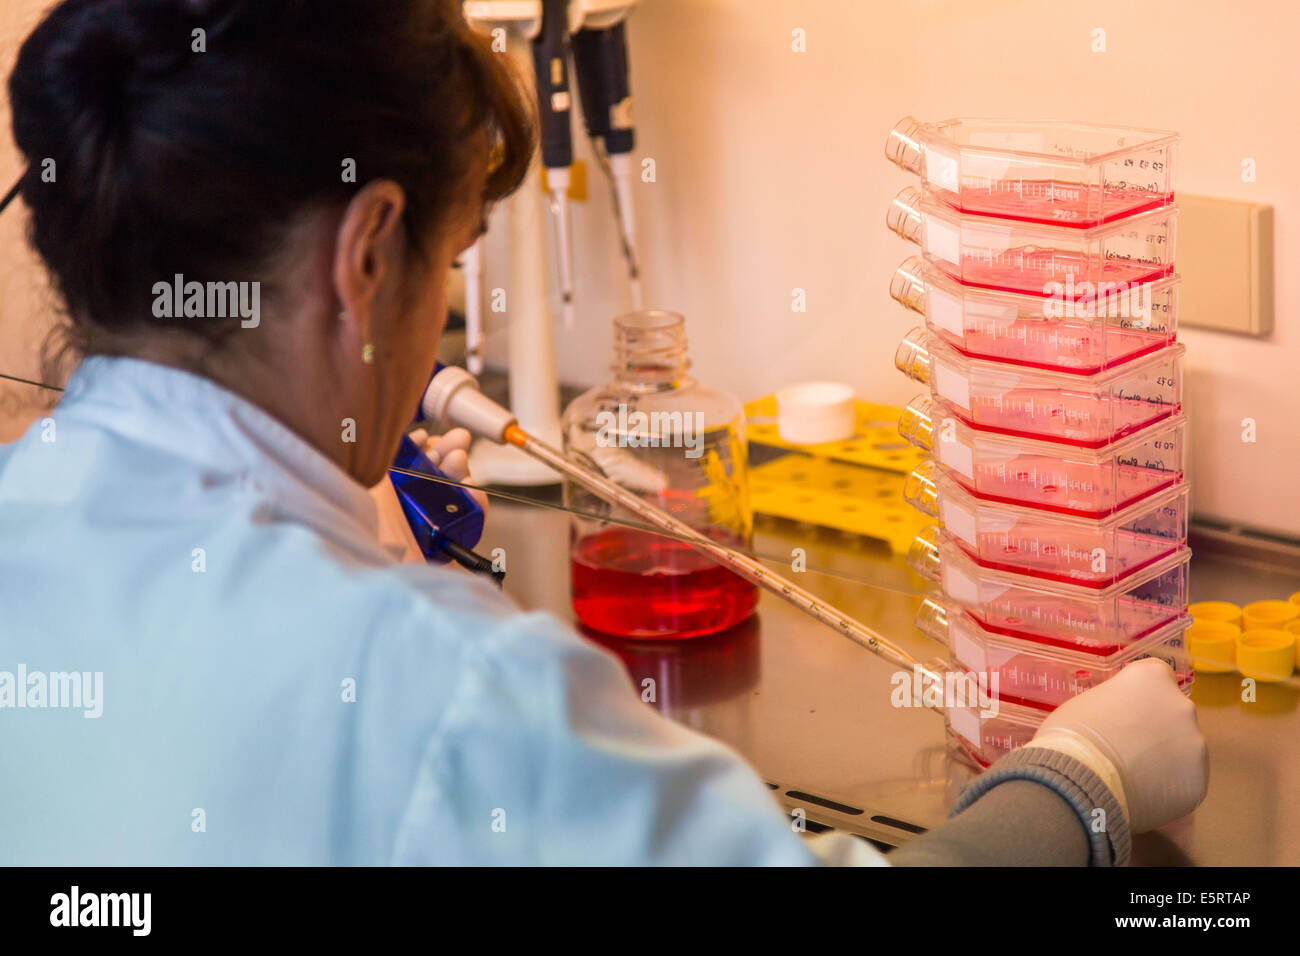 Researcher pipetting Mesenchymal Stem Cells (MSC) culture. Stock Photo